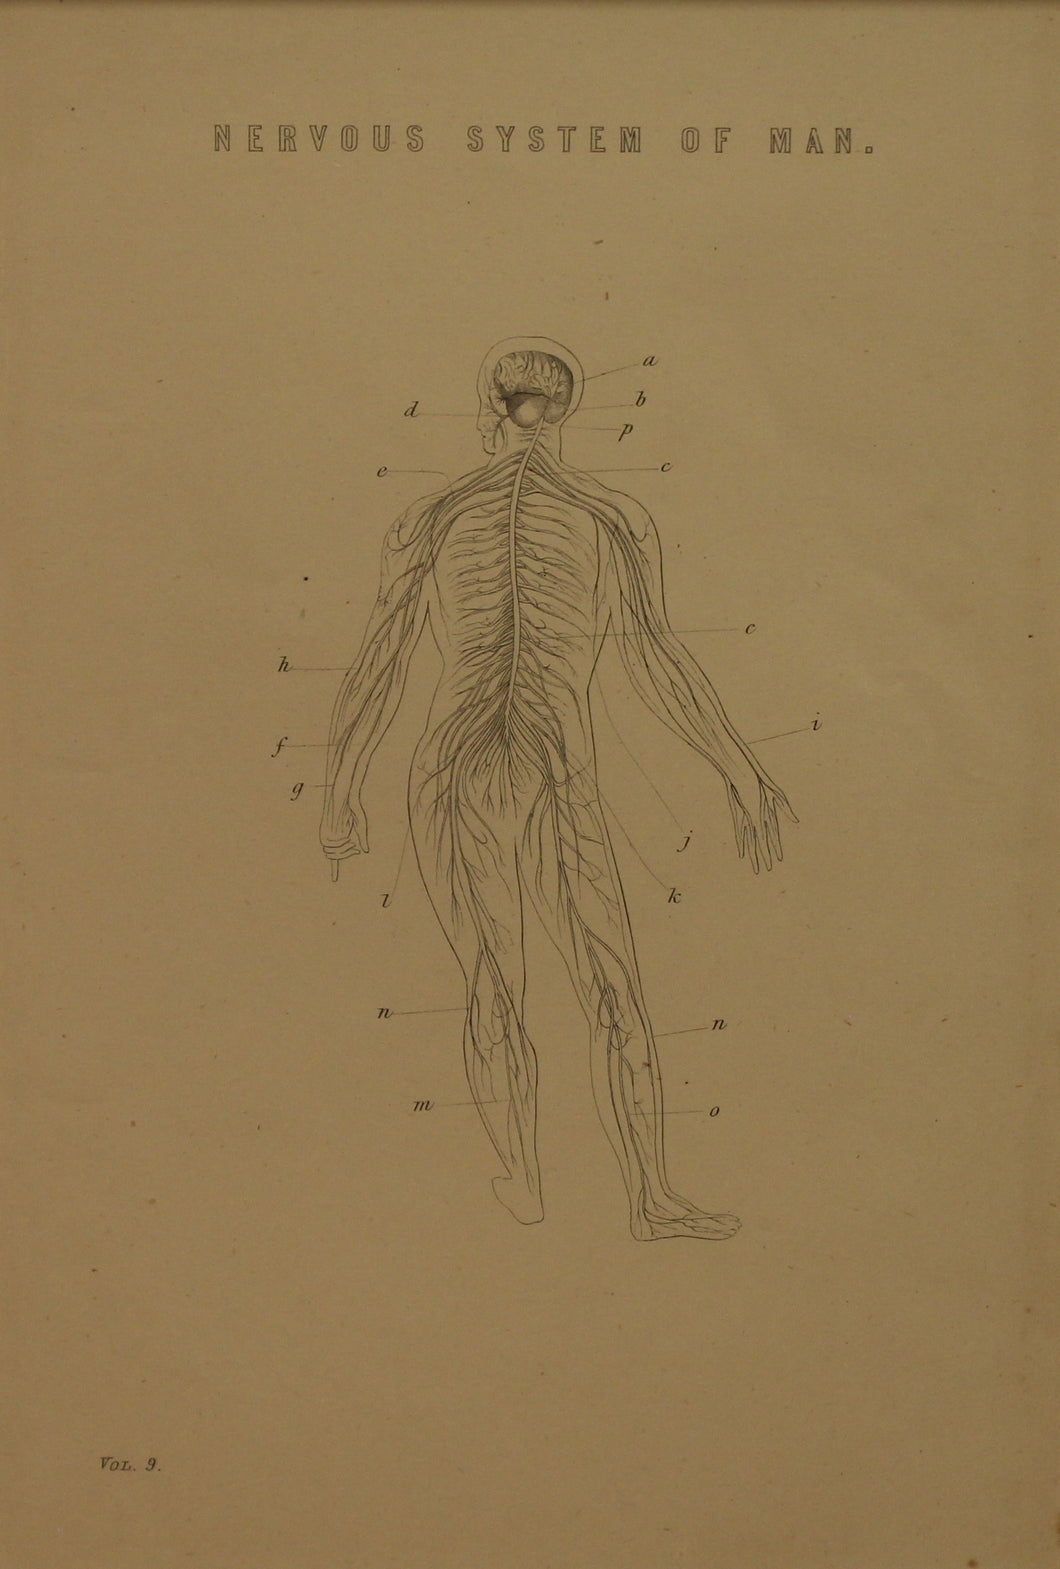 Professions, Anatomy, Nervous System of Man, Plate 2,  Europe Illustrated, c1842,